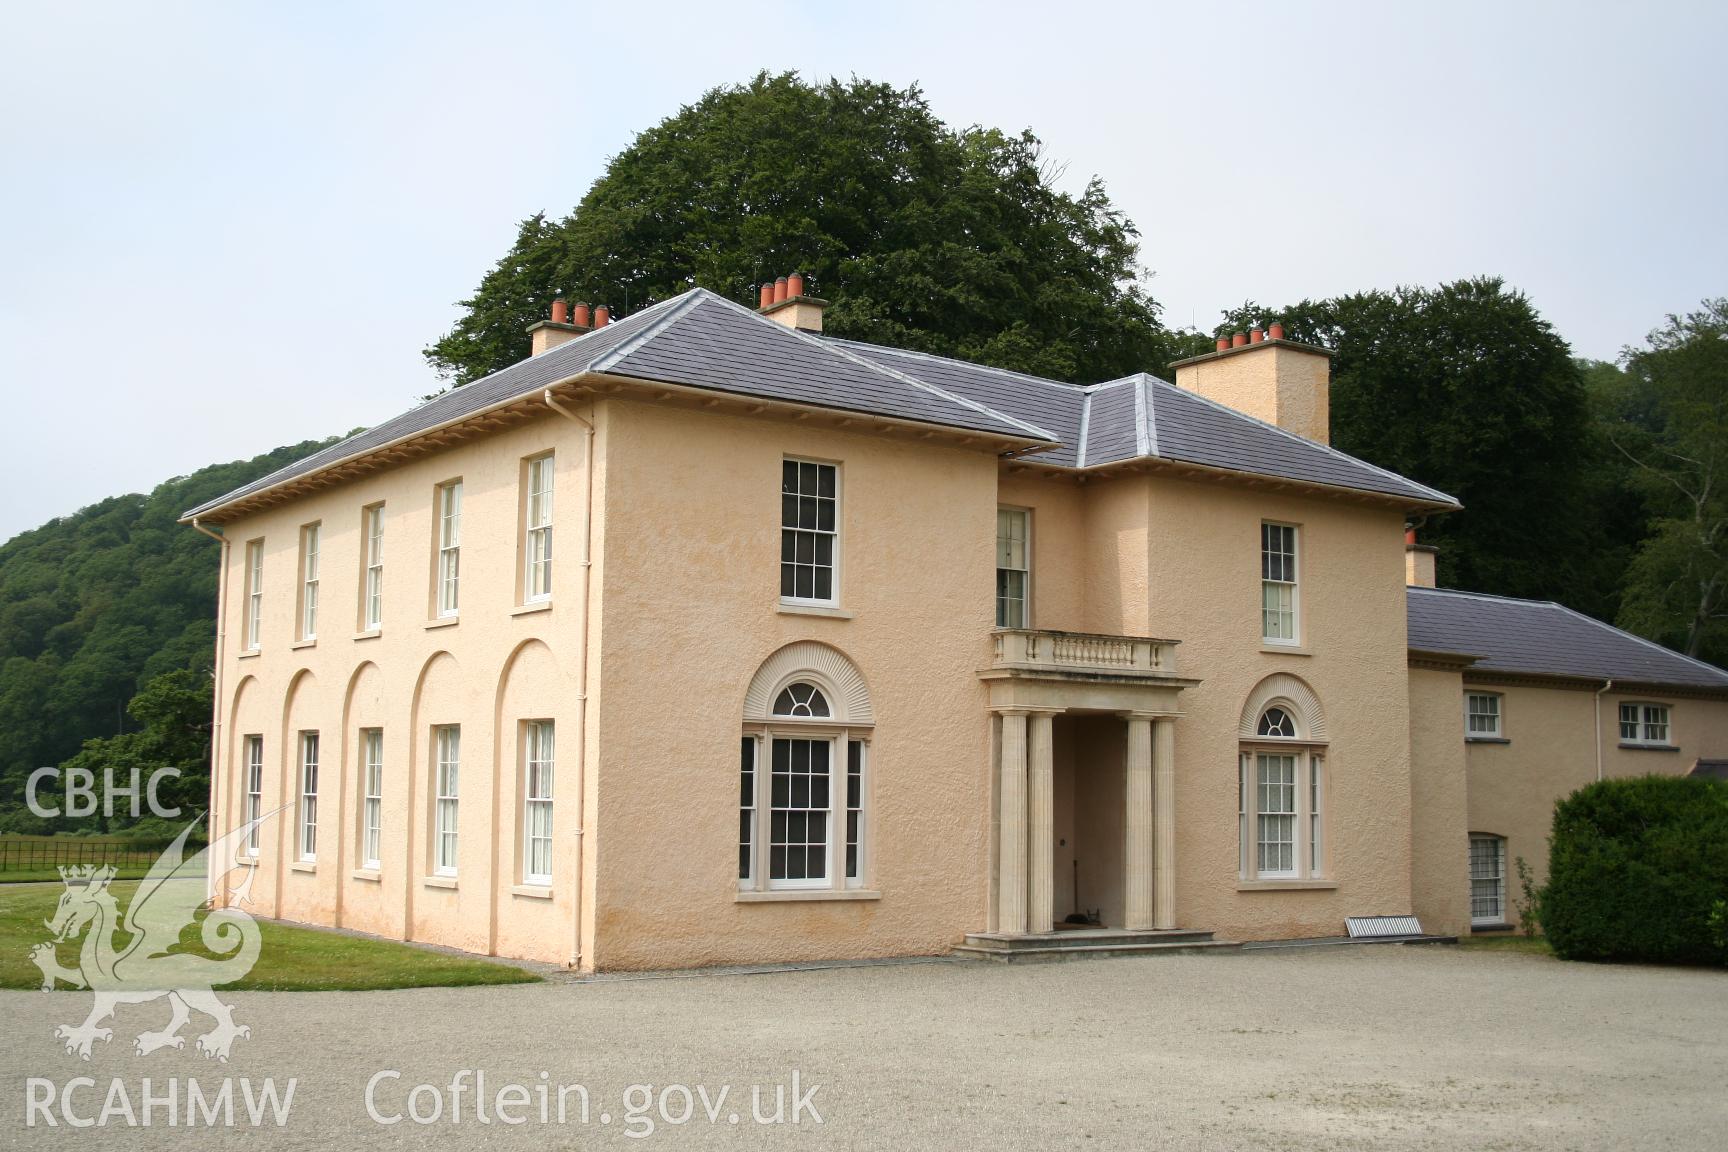 View of Llanaeron House from the south, taken by Brian Malaws on 01 July 2006.